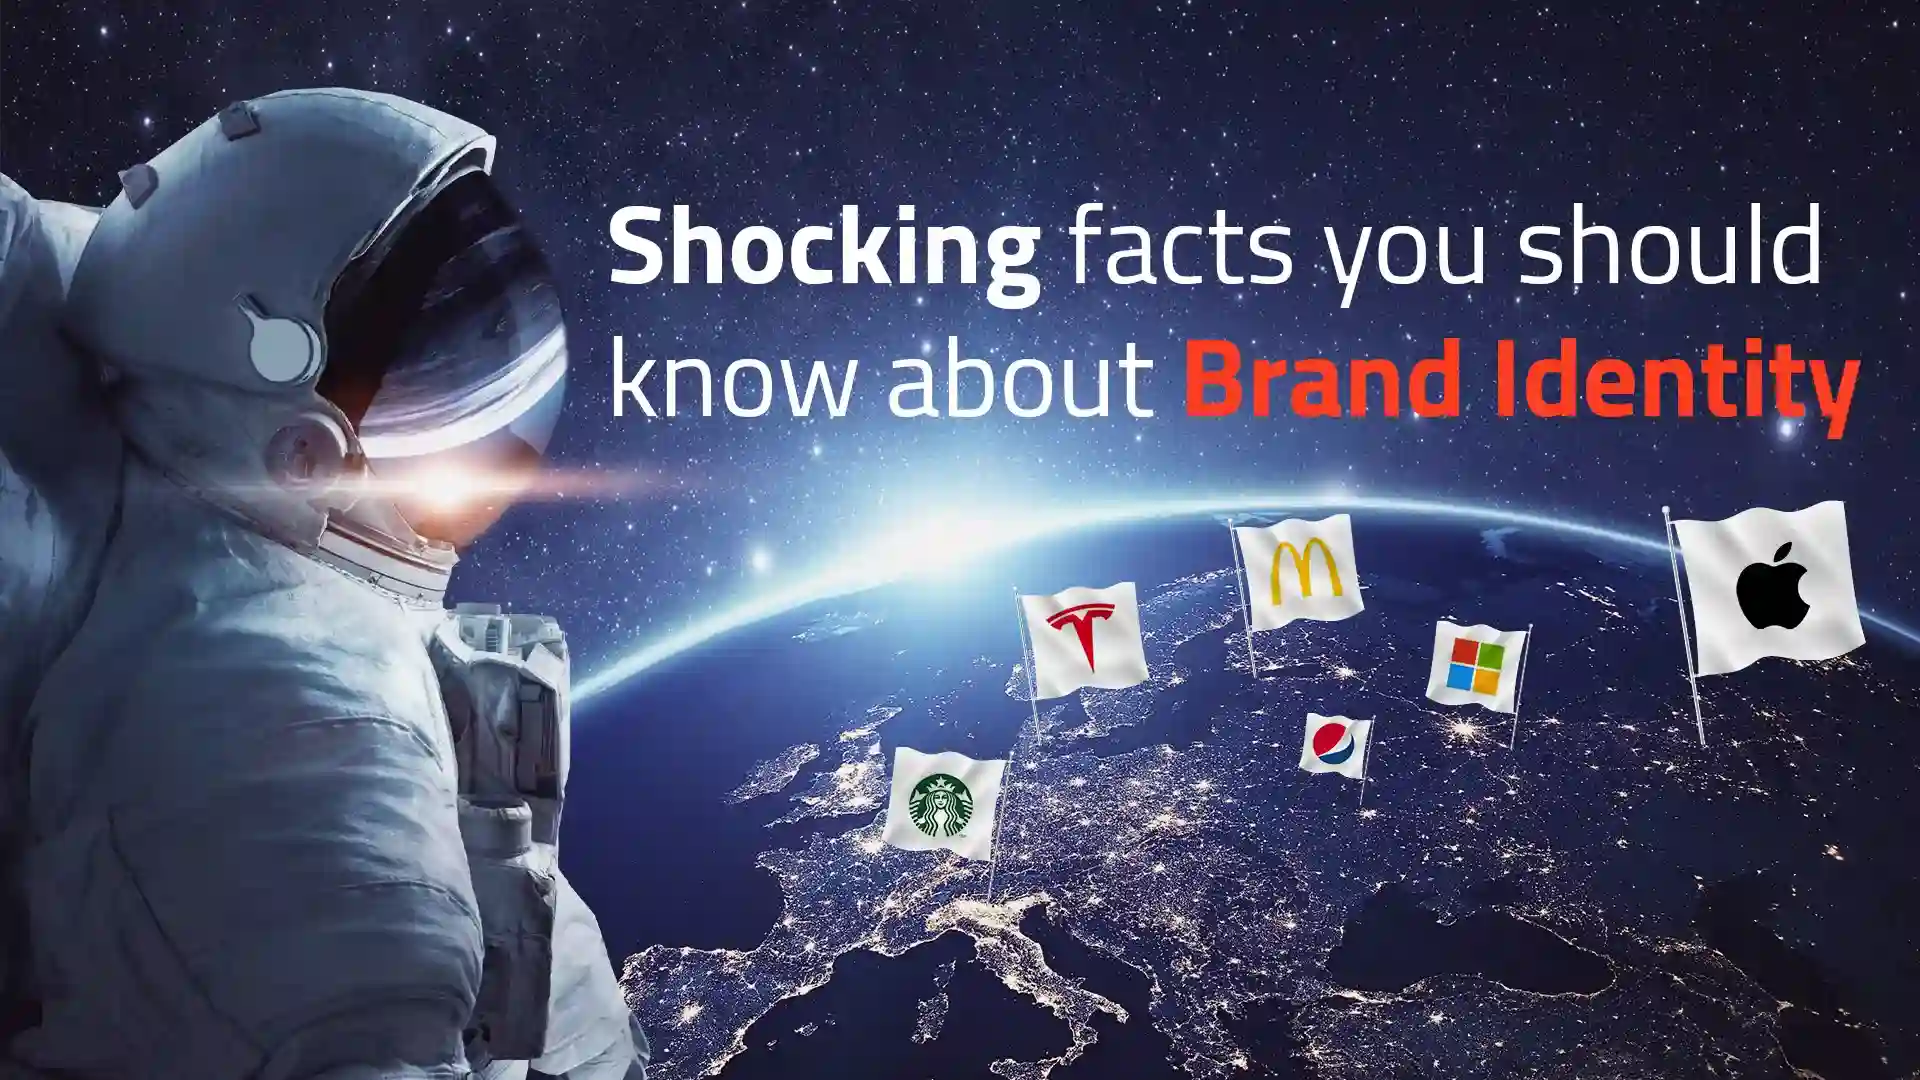 Shocking facts you should know about brand identity